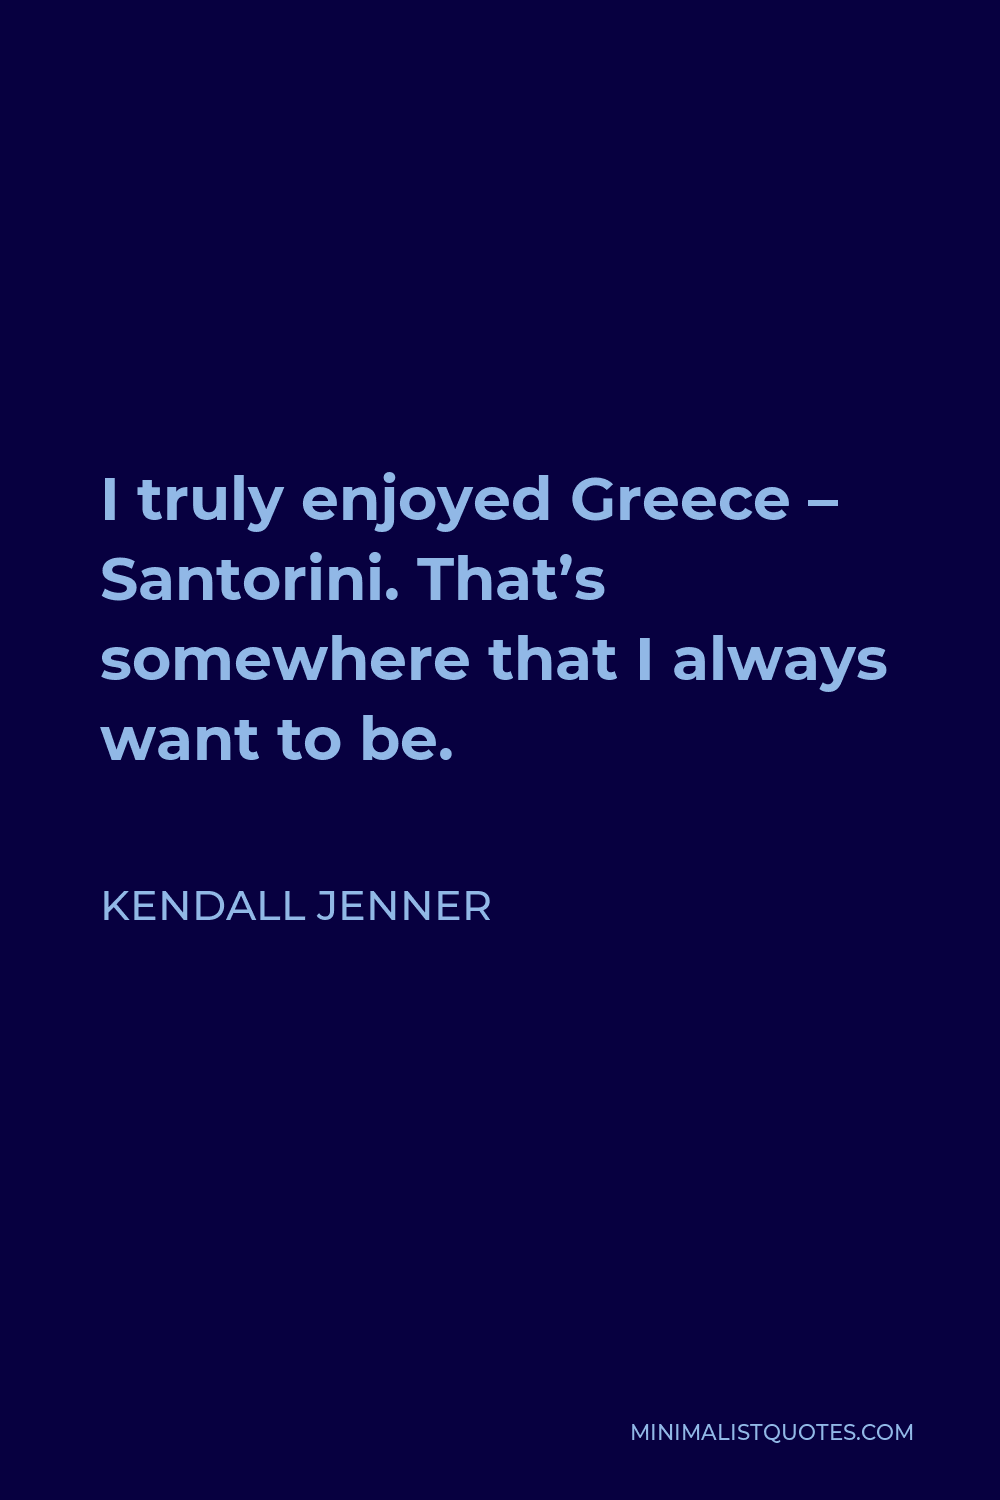 Kendall Jenner Quote - I truly enjoyed Greece – Santorini. That’s somewhere that I always want to be.